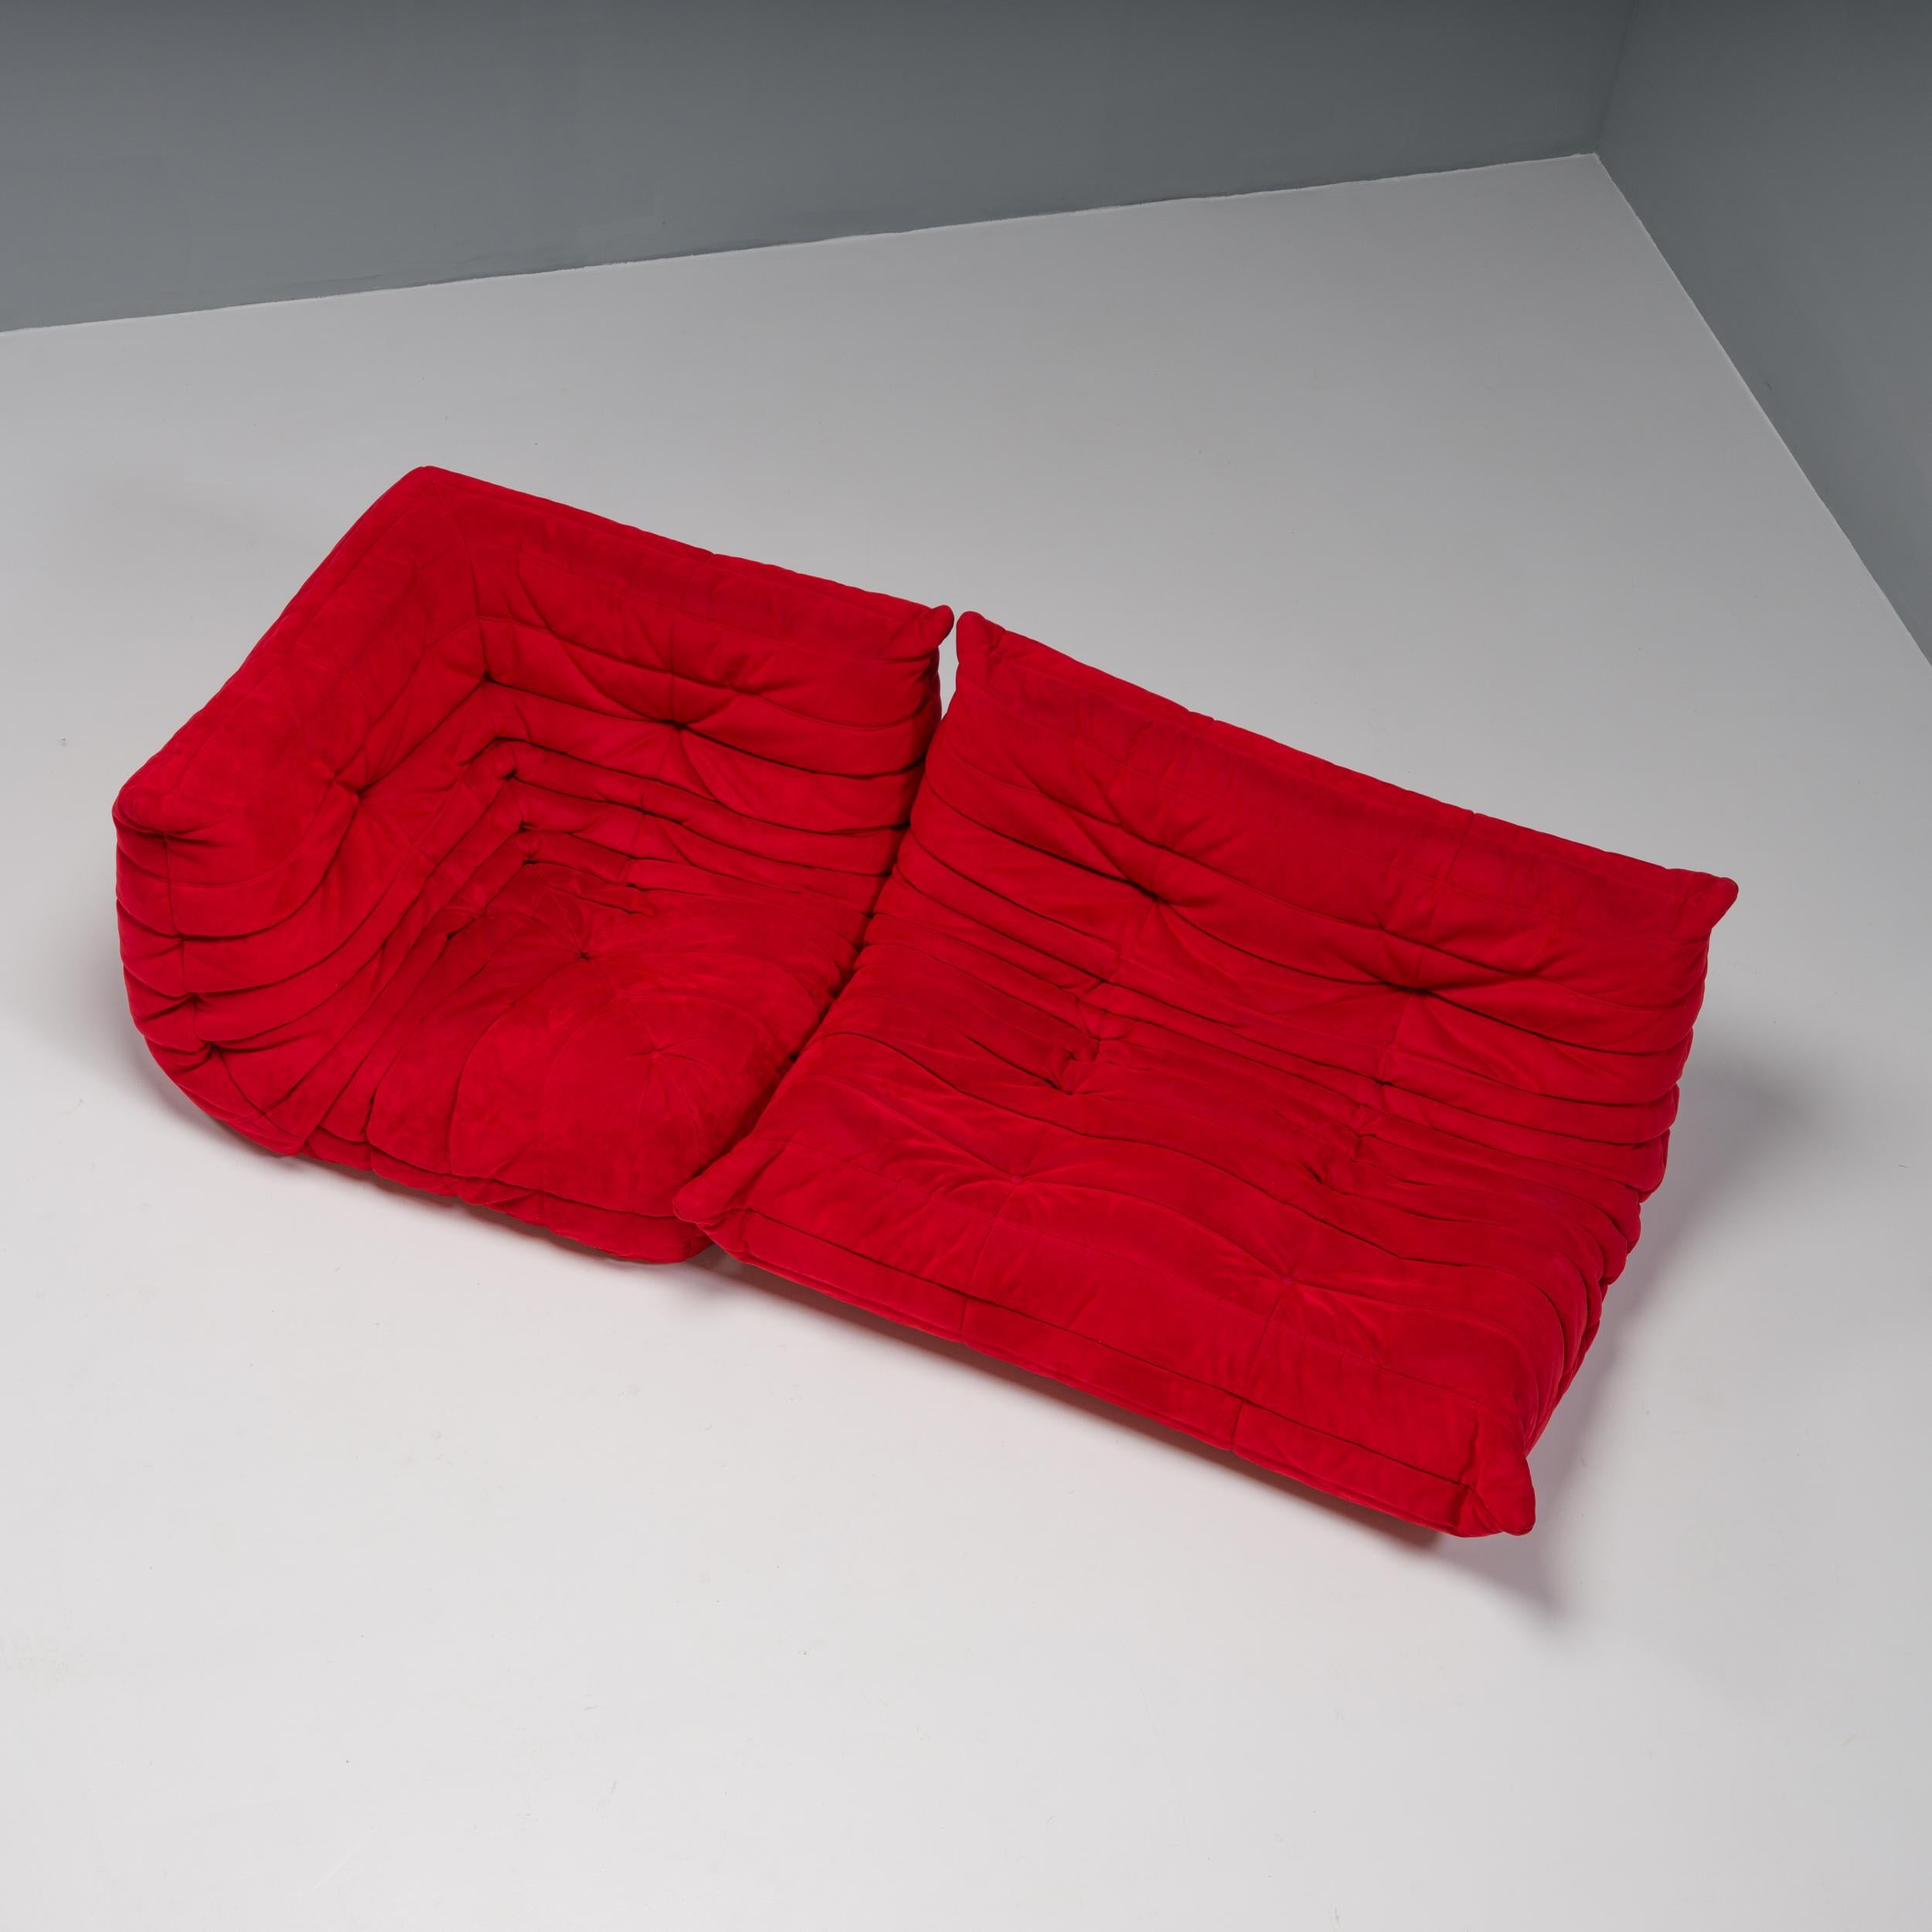 The iconic Togo sofa, originally designed by Michel Ducaroy for Ligne Roset in 1973, has become a design classic.

This red two-piece modular set is incredibly versatile and can be configured into one corner sofa or used separately.

Comprising